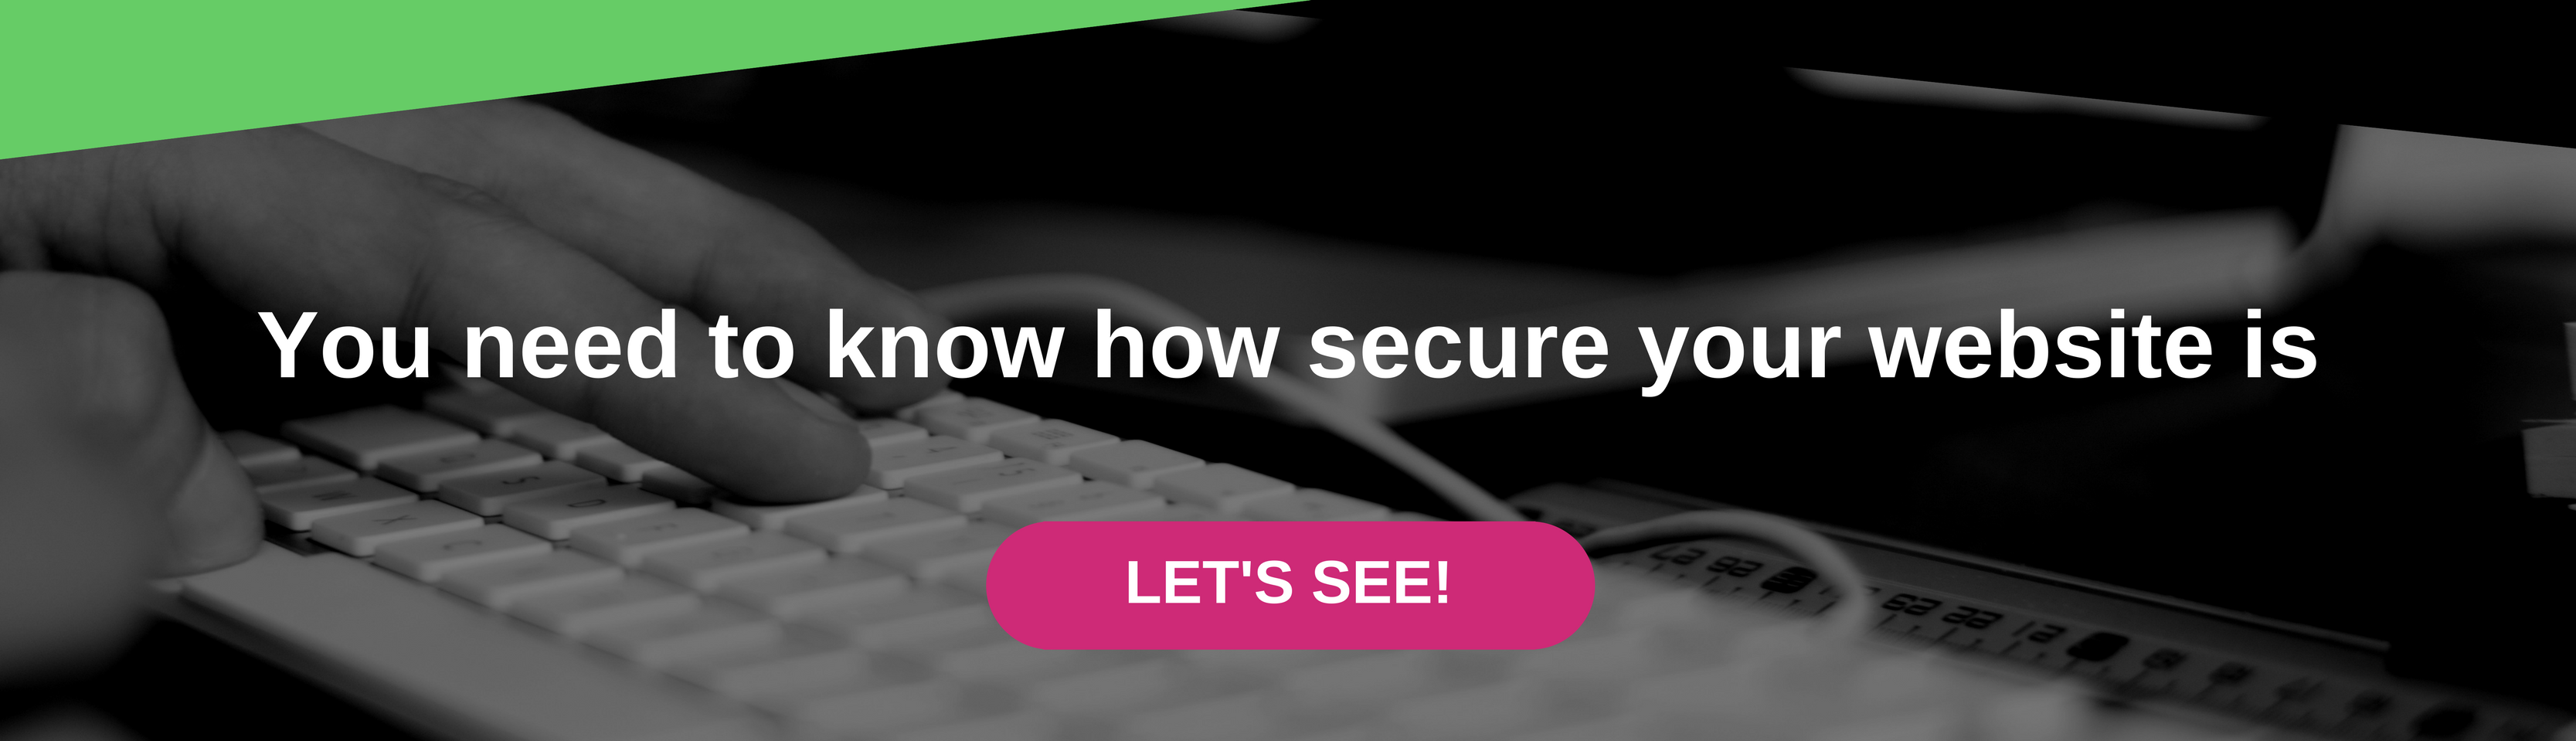 Know how secure your website is - ods